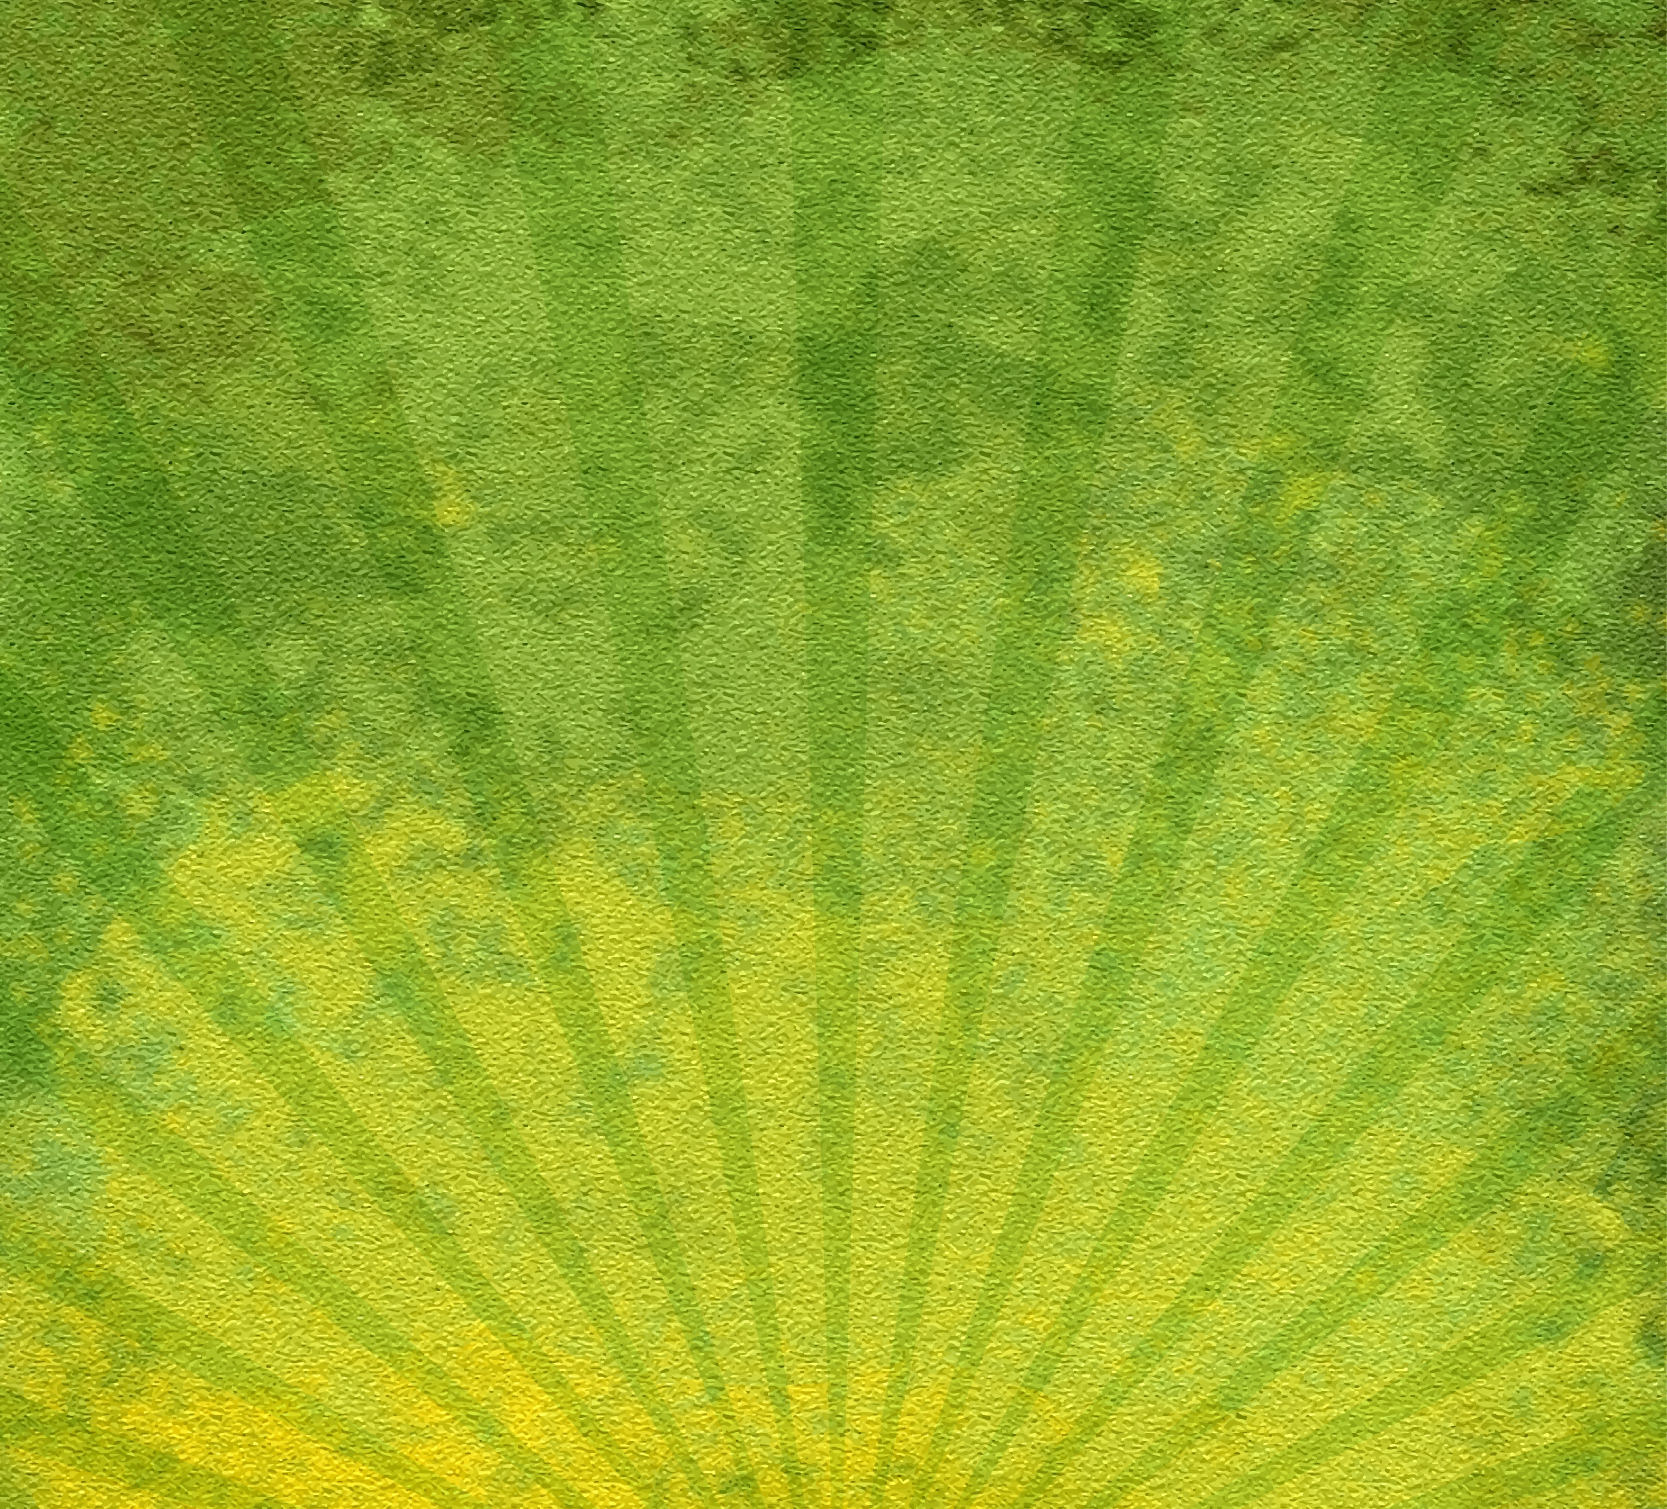 Striped Green Background